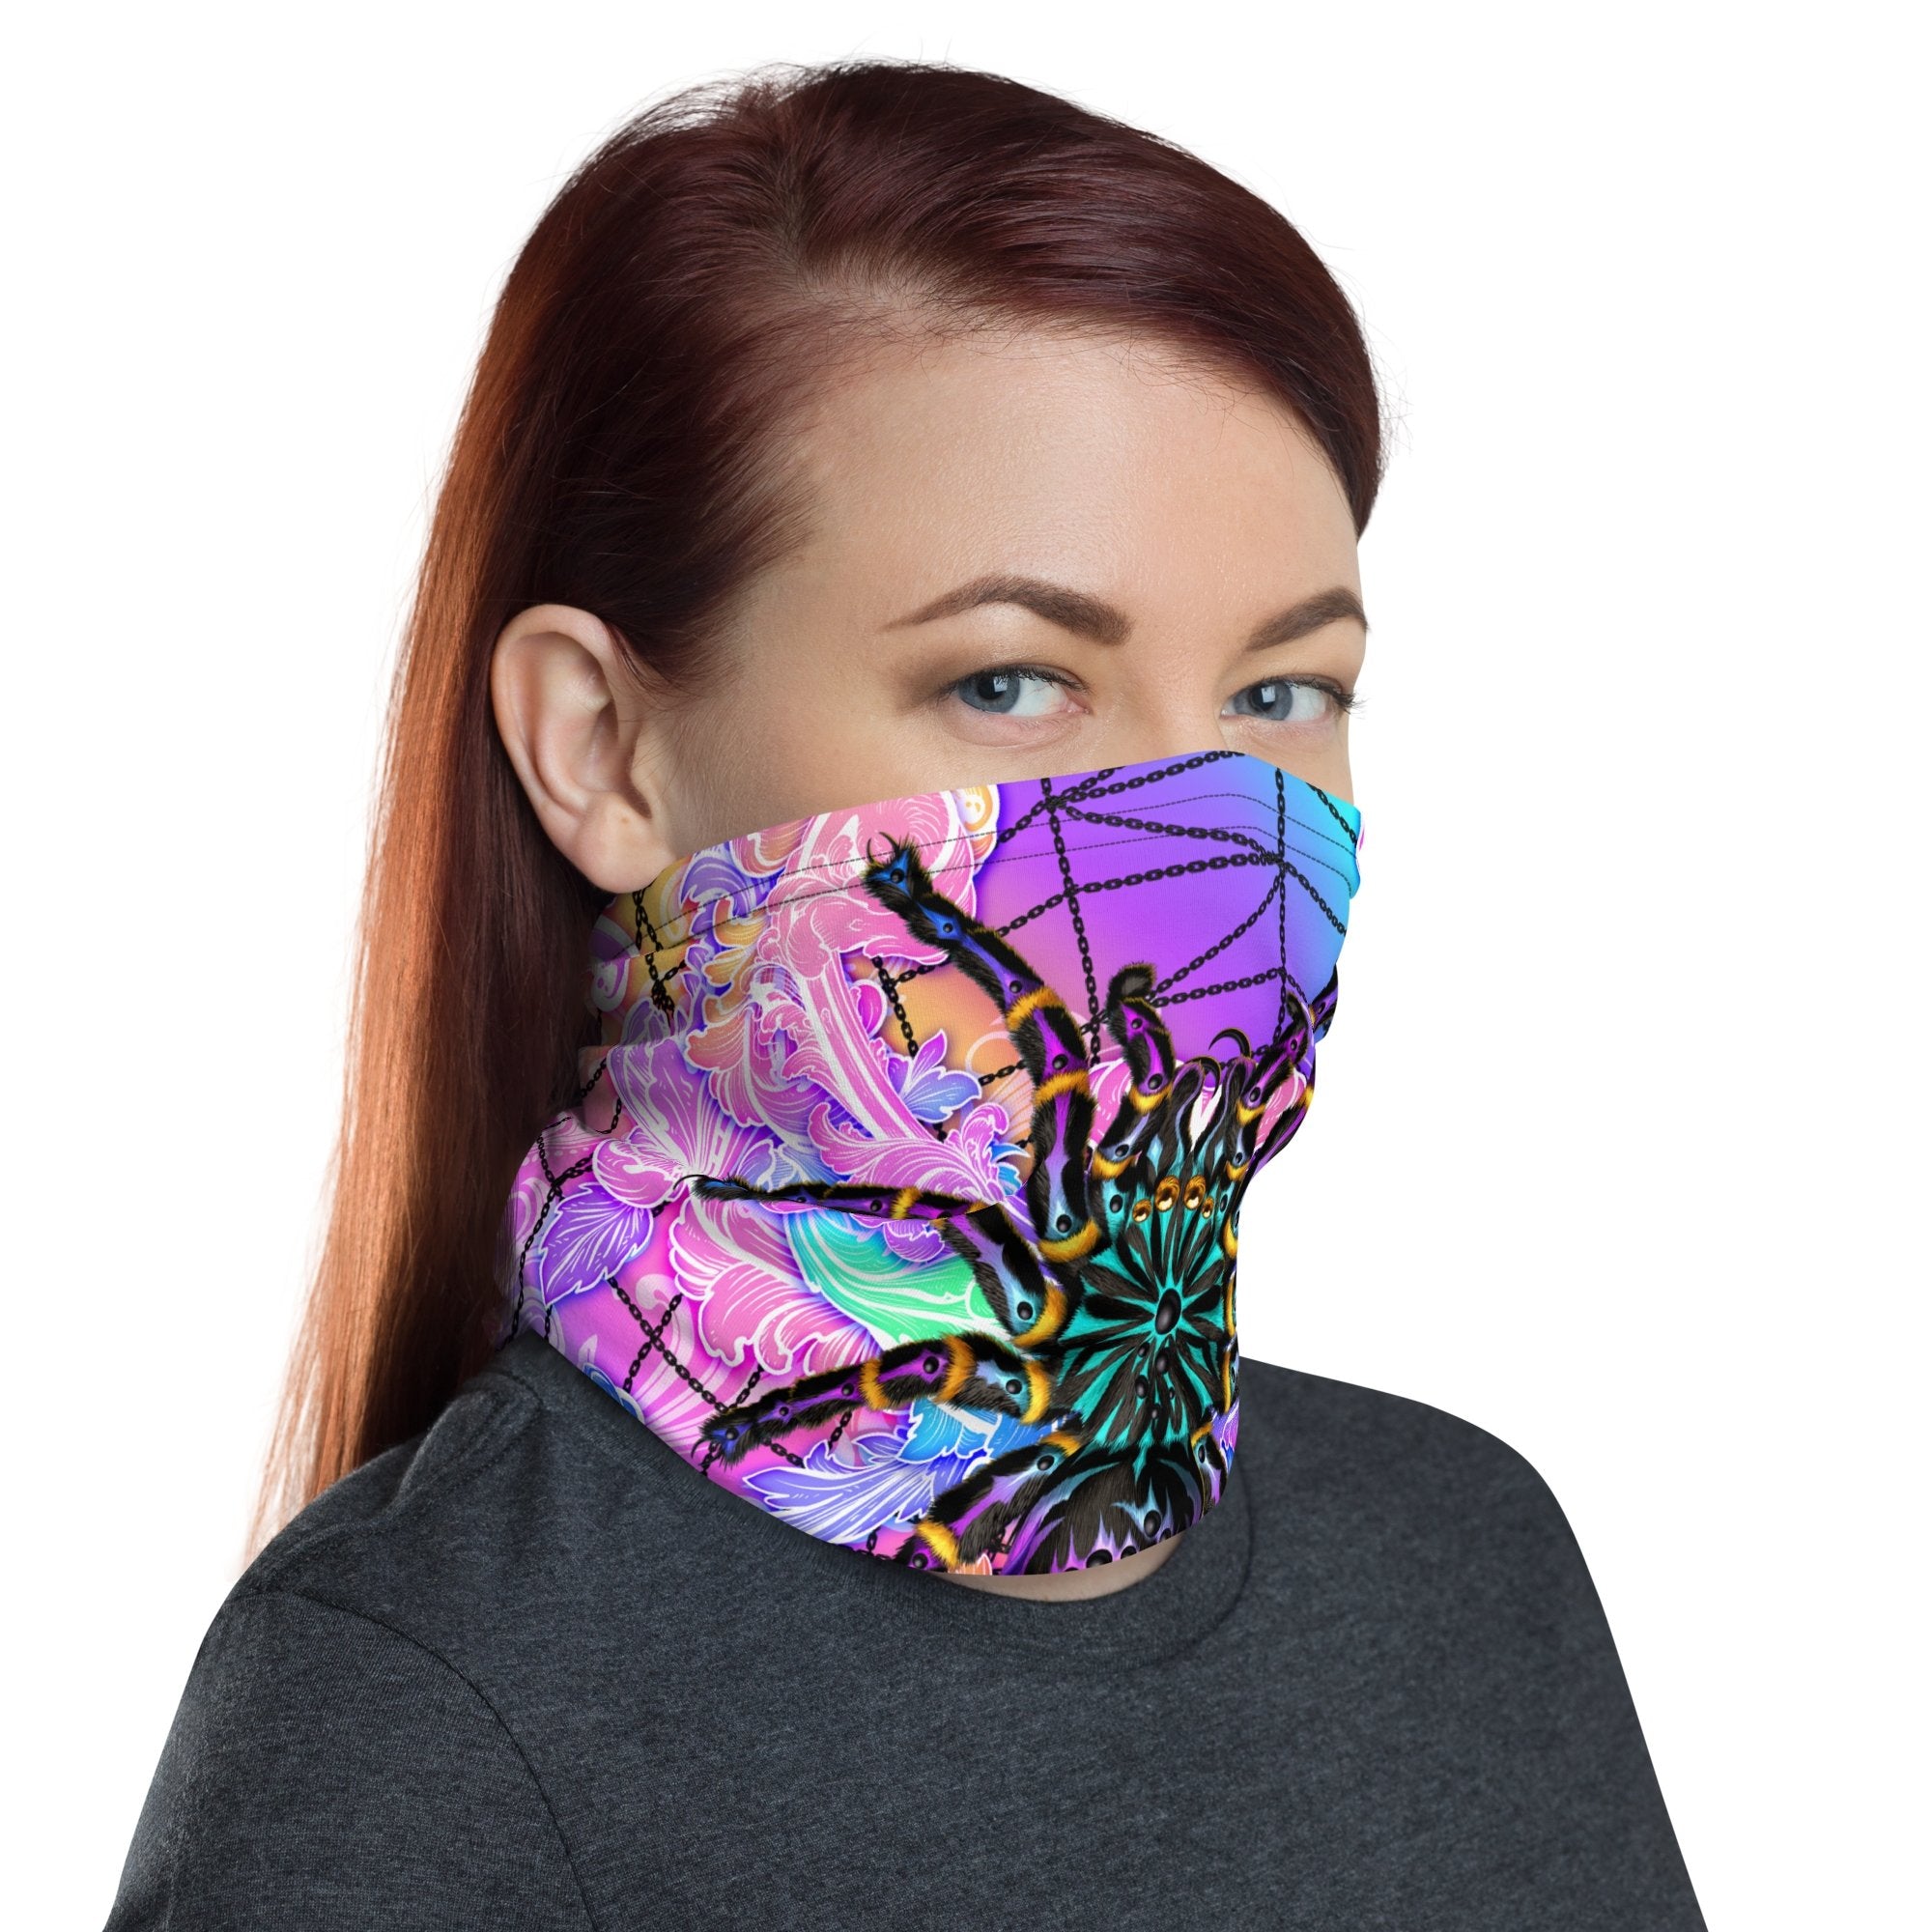 Psychedelic Neck Gaiter, Face Mask, Head Covering, Holographic Pastel Punk , Aesthetic, Festival Rave Outfit, Tarantula Lover Gift - Black Spider - Abysm Internal